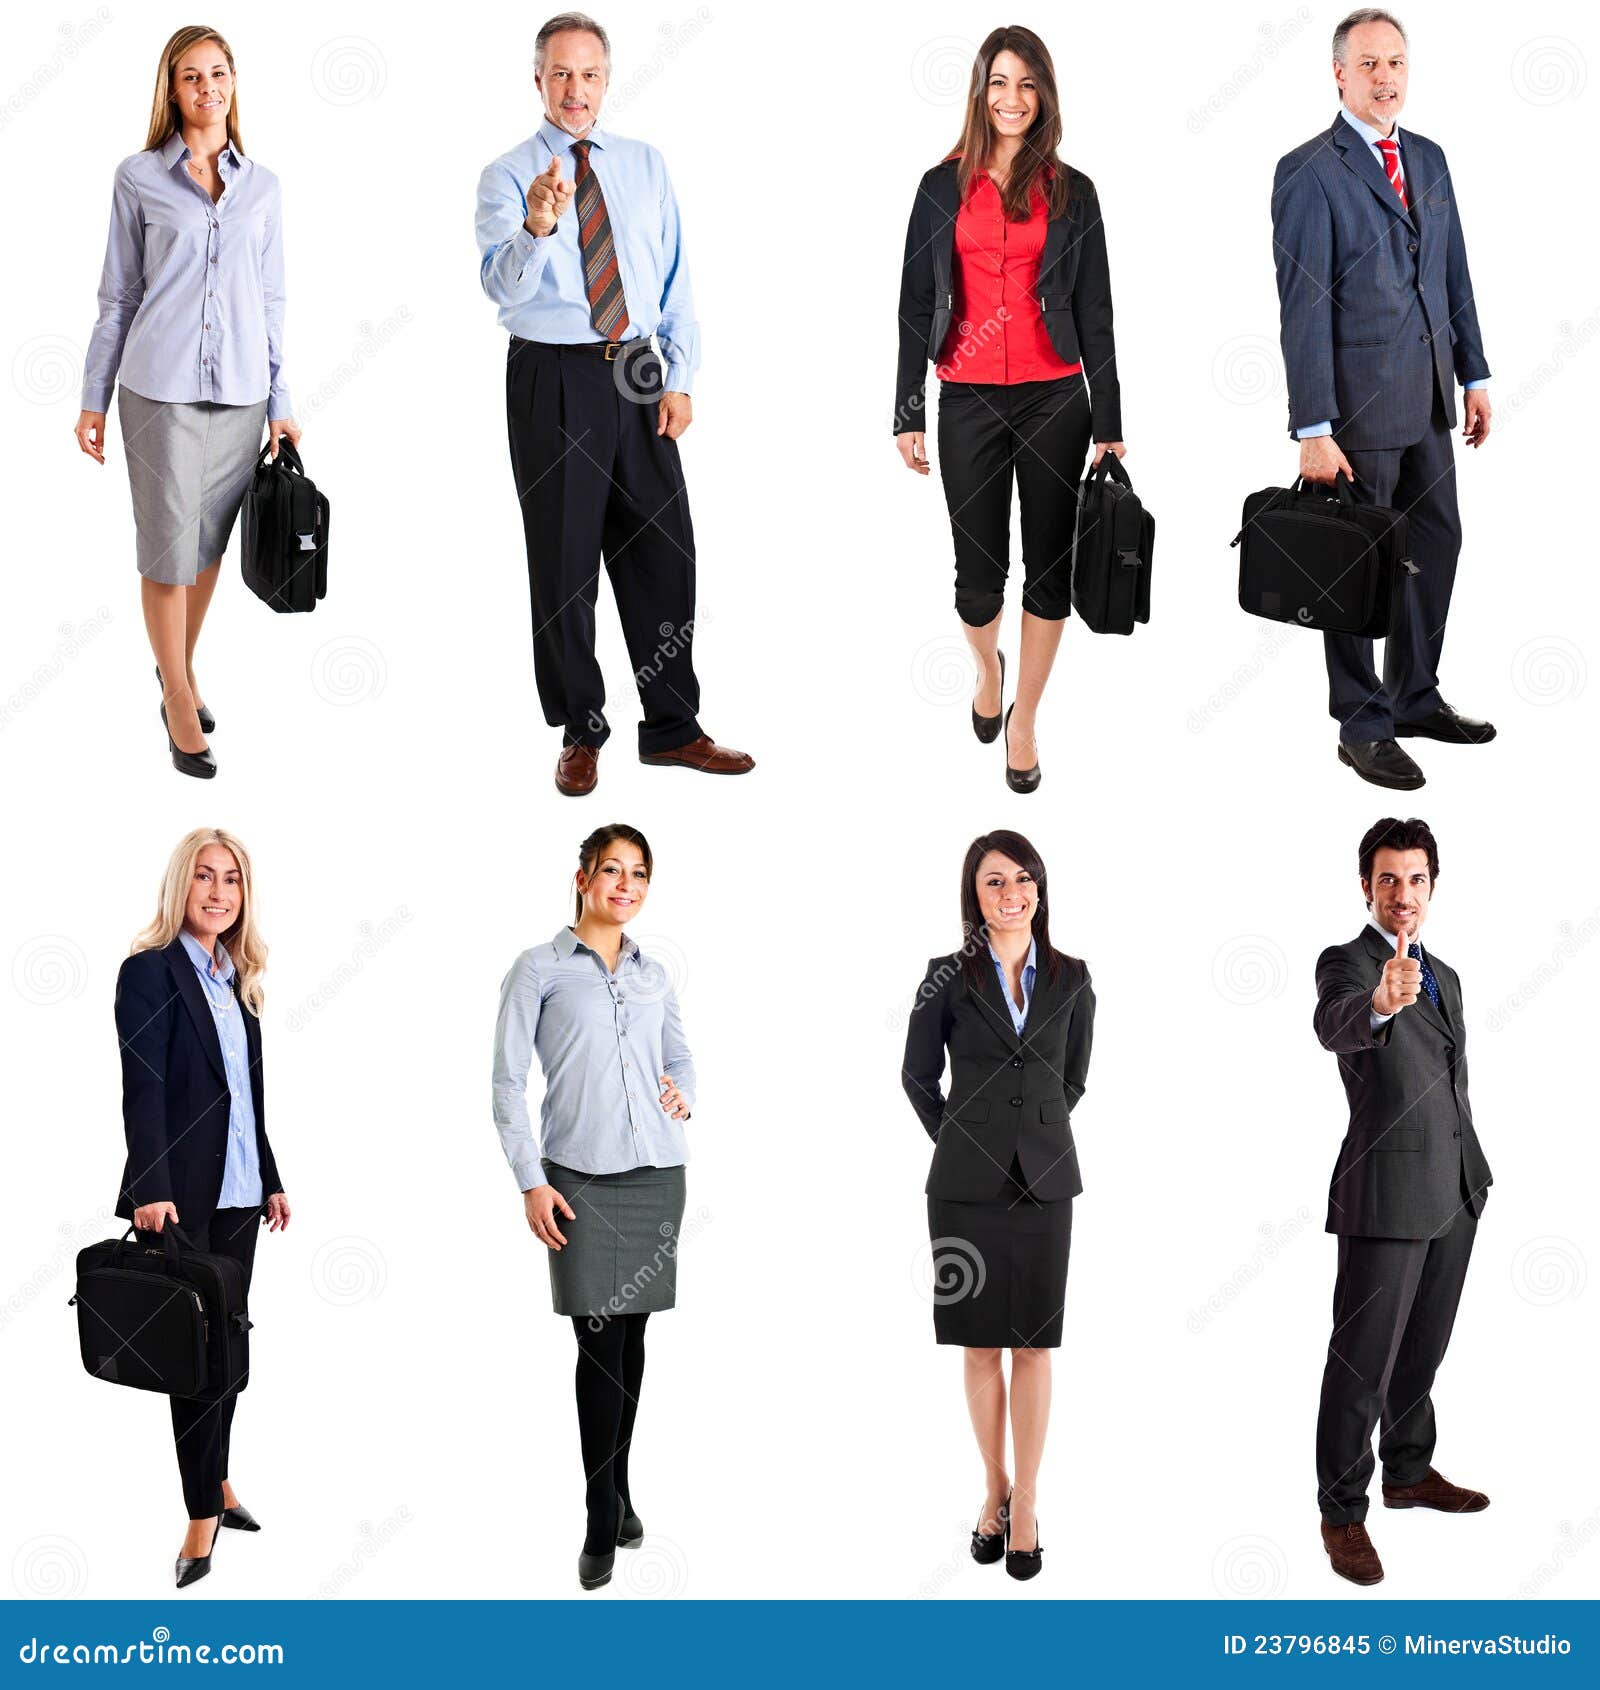 Business people stock image. Image of group, isolated - 23796845